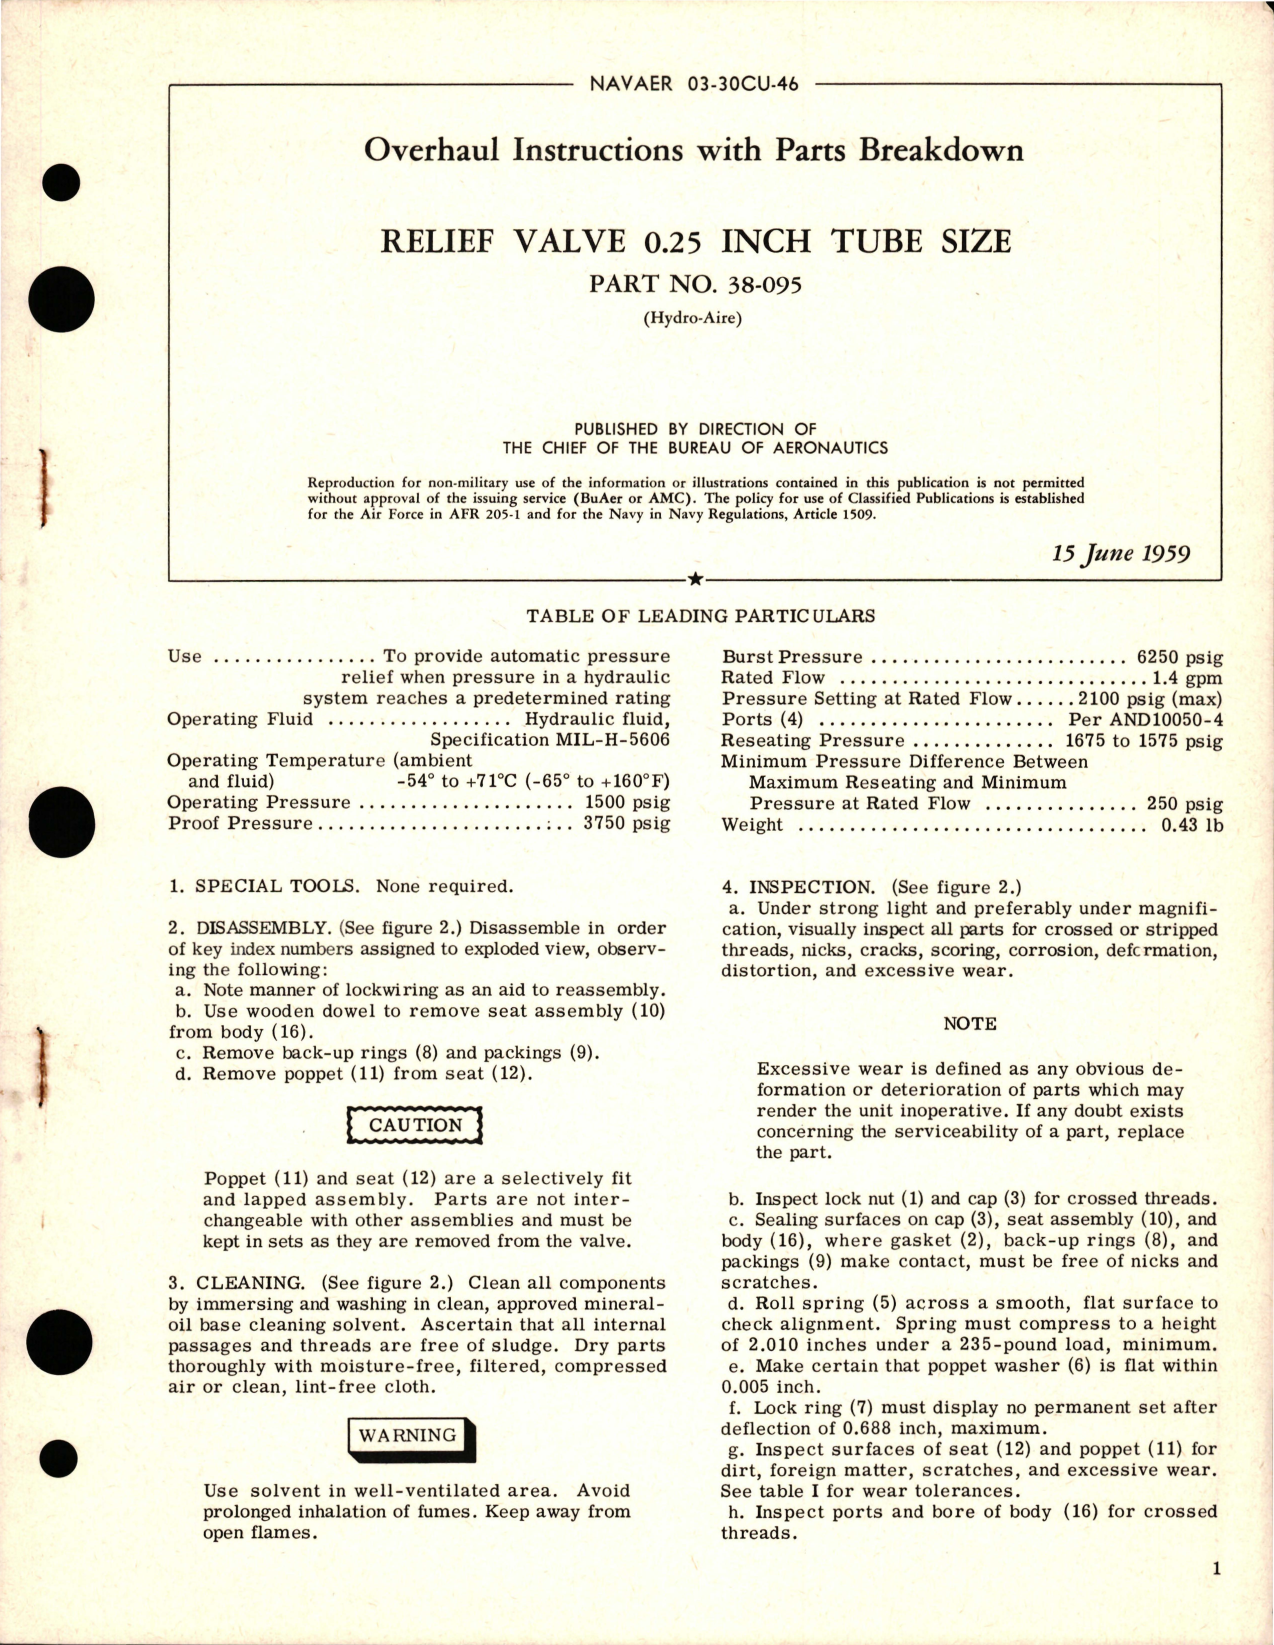 Sample page 1 from AirCorps Library document: Overhaul Instructions with Parts Breakdown for Relief Valve 0.25 inch Tube Size - Part 38-095